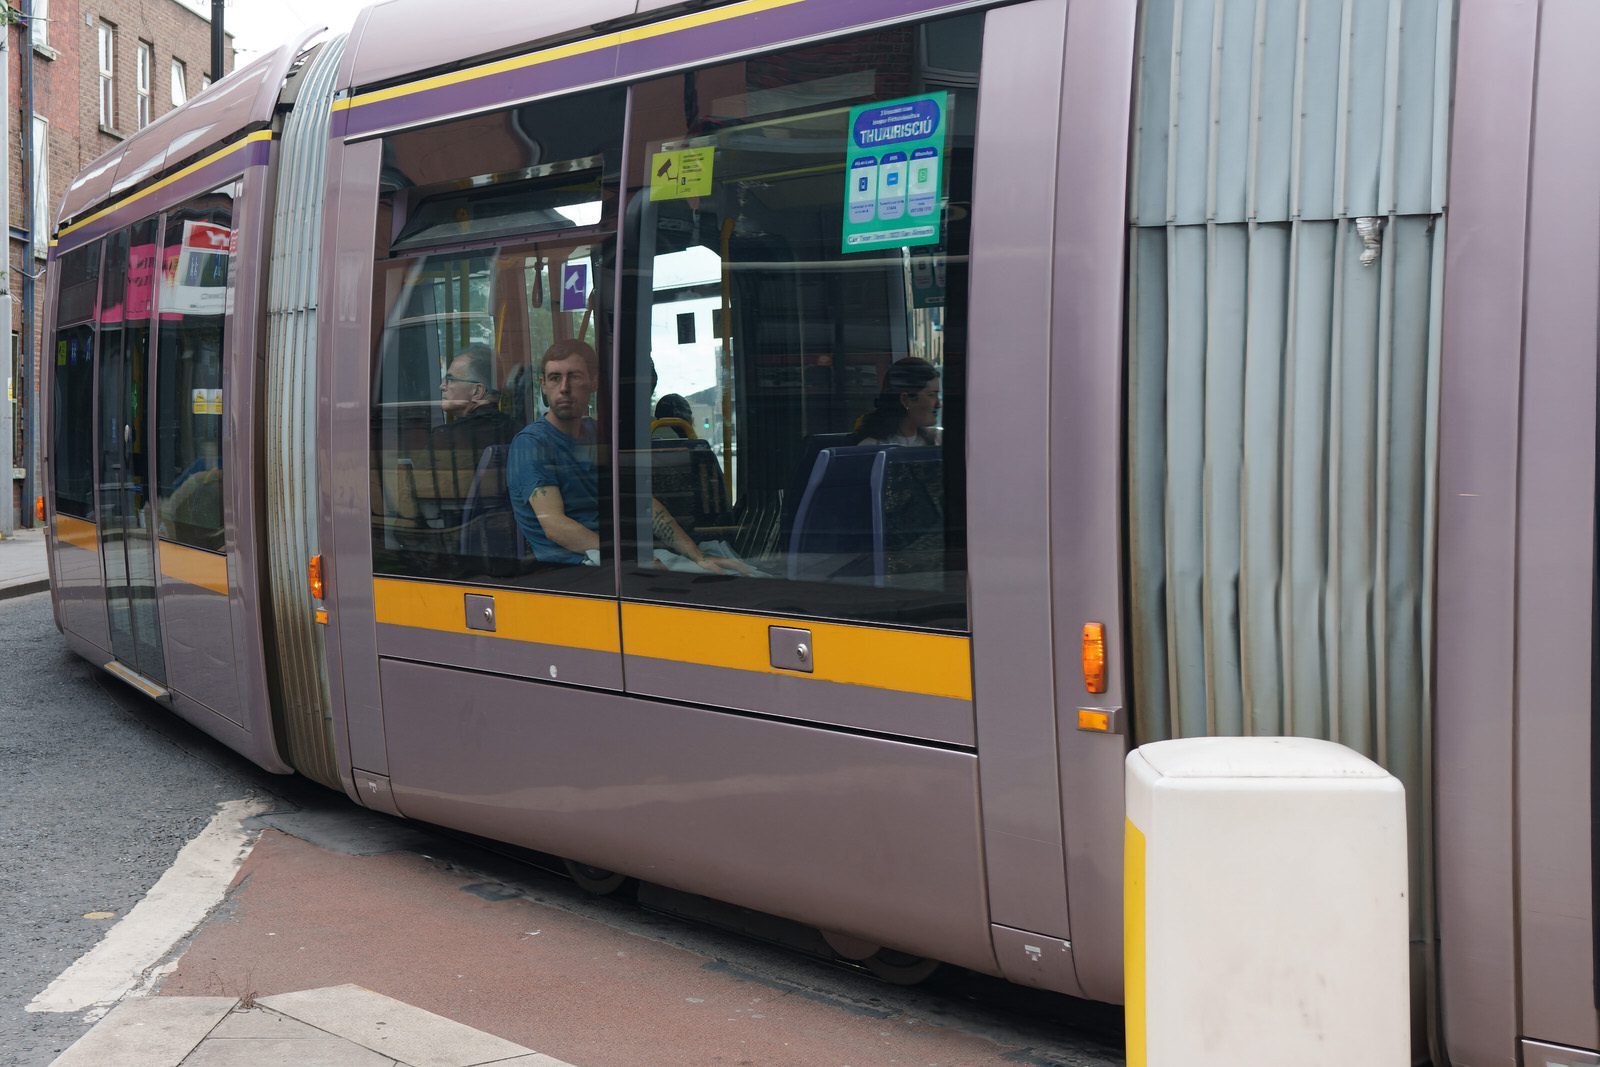 WHY WOULD ANYONE PHOTOGRAPH A TRAM COMING UP A HILL - A PASSERBY ACTUALLY ASKED ME [MAYBE THE BARD HAS AN ANSWER] 001